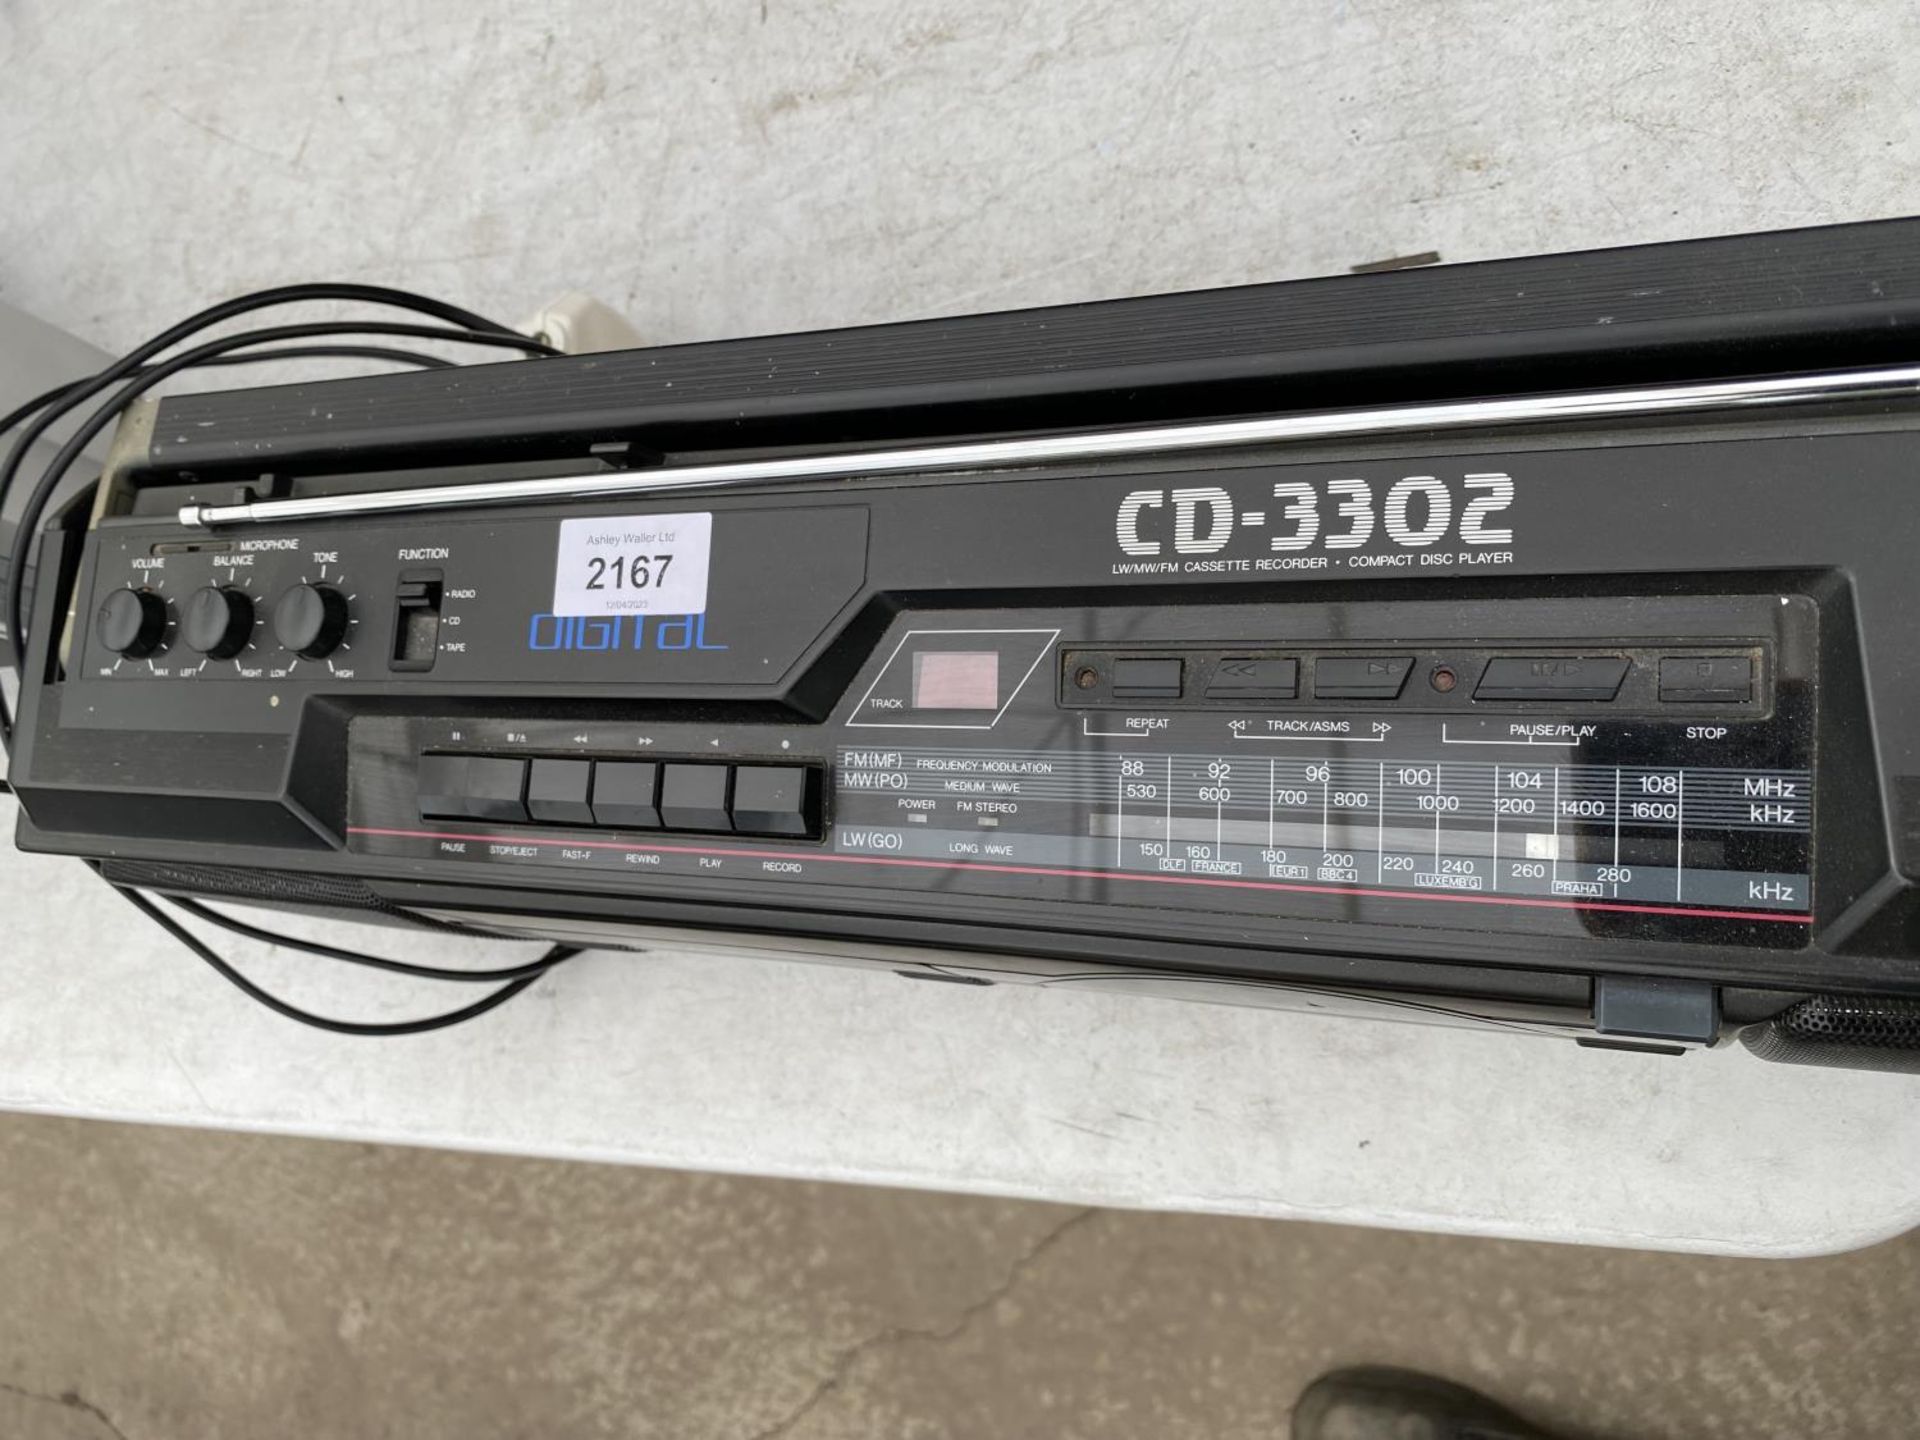 A MEMOREX CD-3302 RADIO AND CASSETTE PLAYER - Image 2 of 2